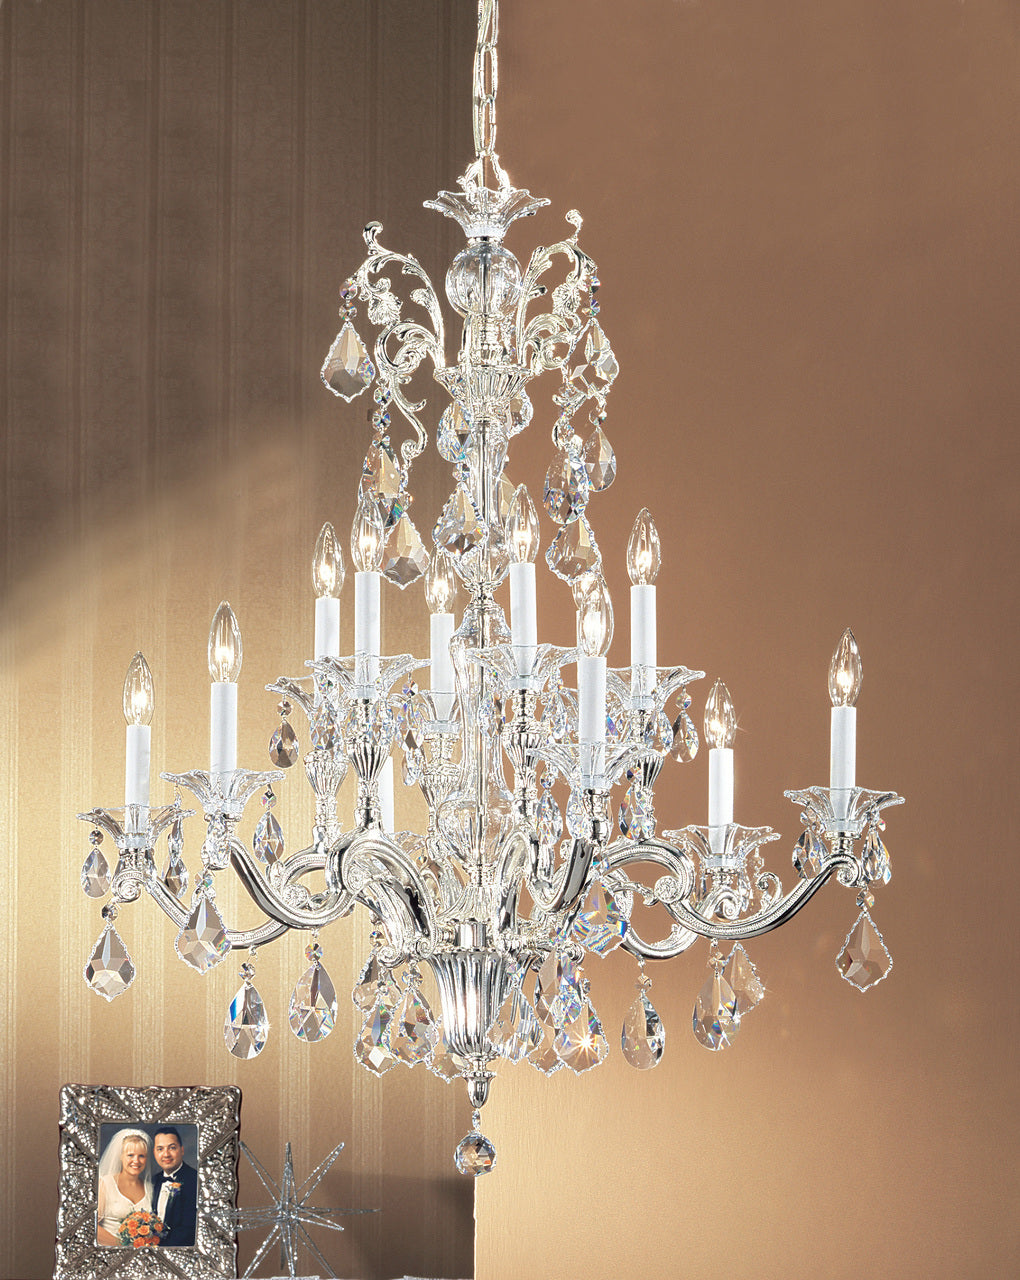 Classic Lighting 57112 SP C Via Firenze Crystal Chandelier in Silver (Imported from Spain)